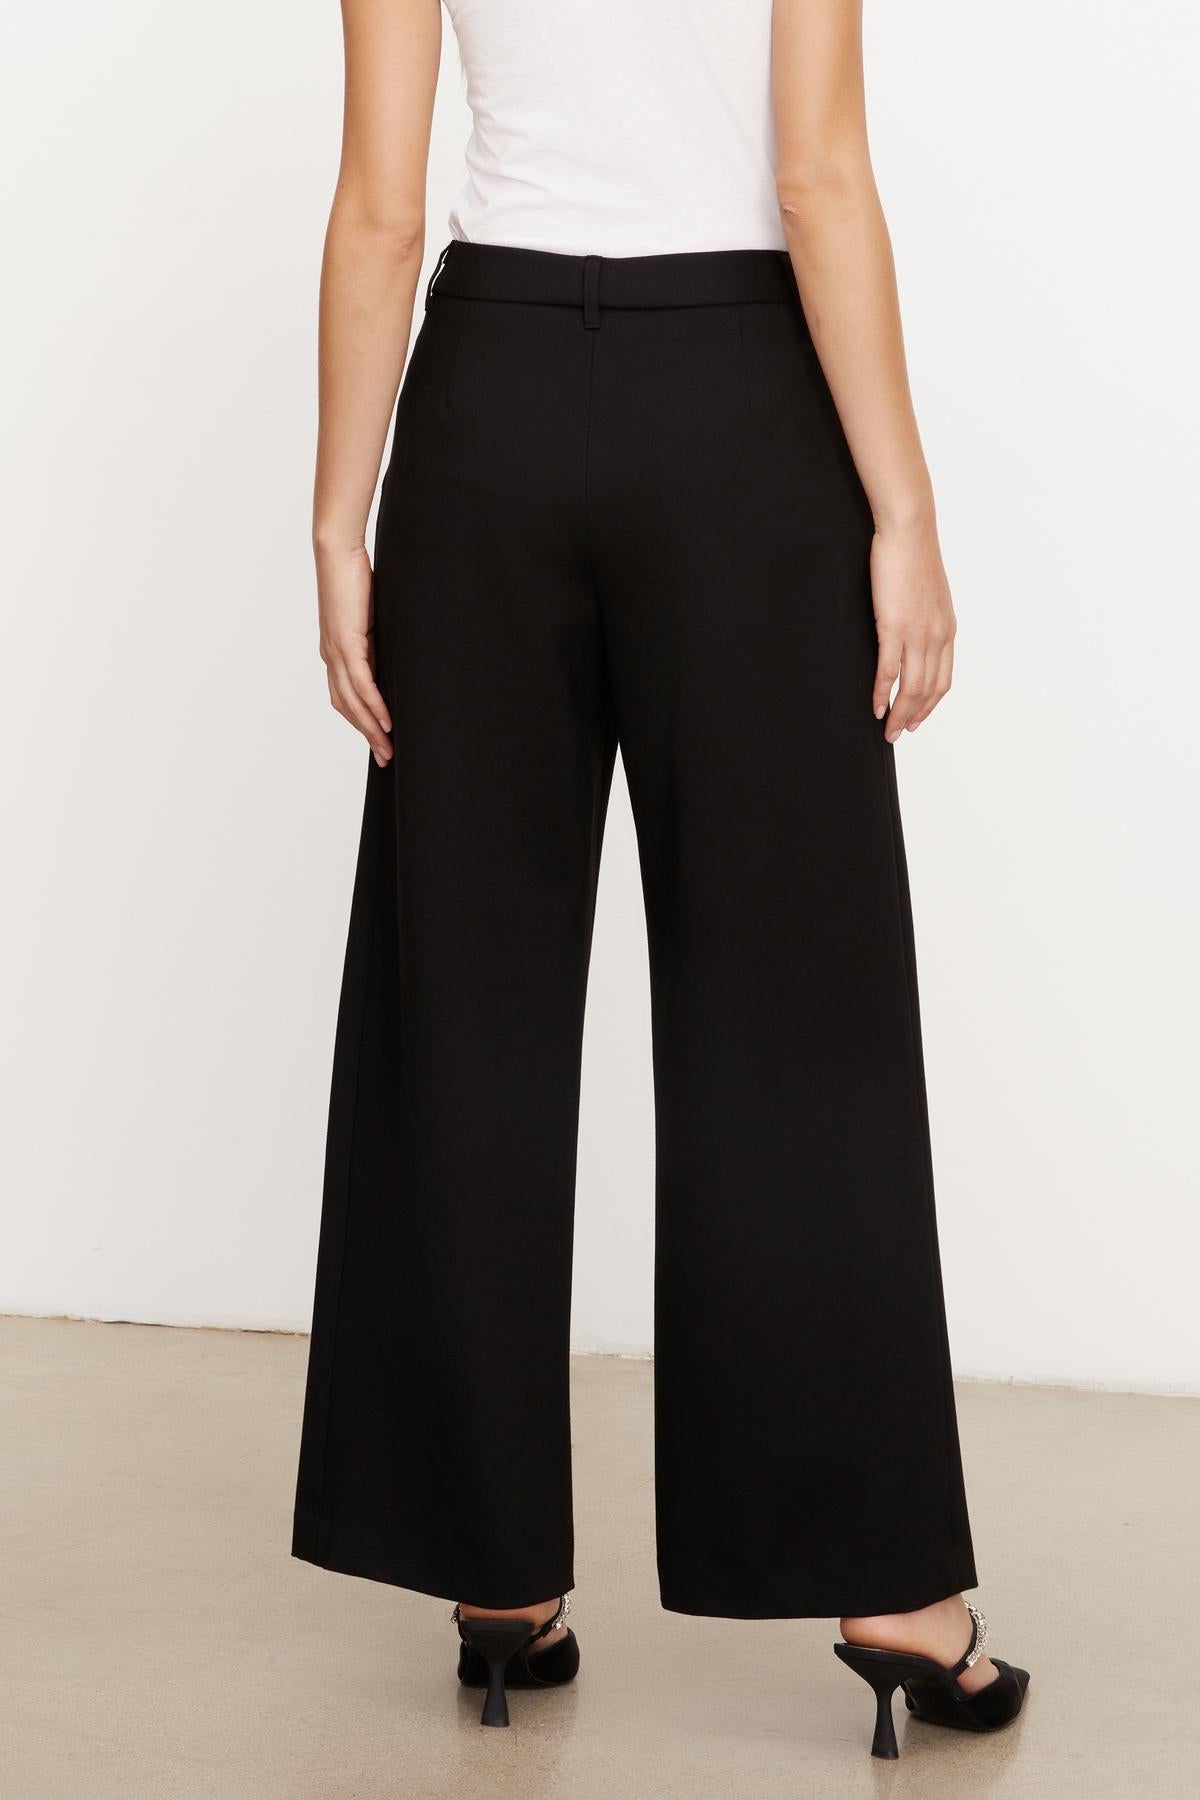   The back view of a person wearing Velvet by Graham & Spencer's LEONA WIDE LEG PONTI PANT. 